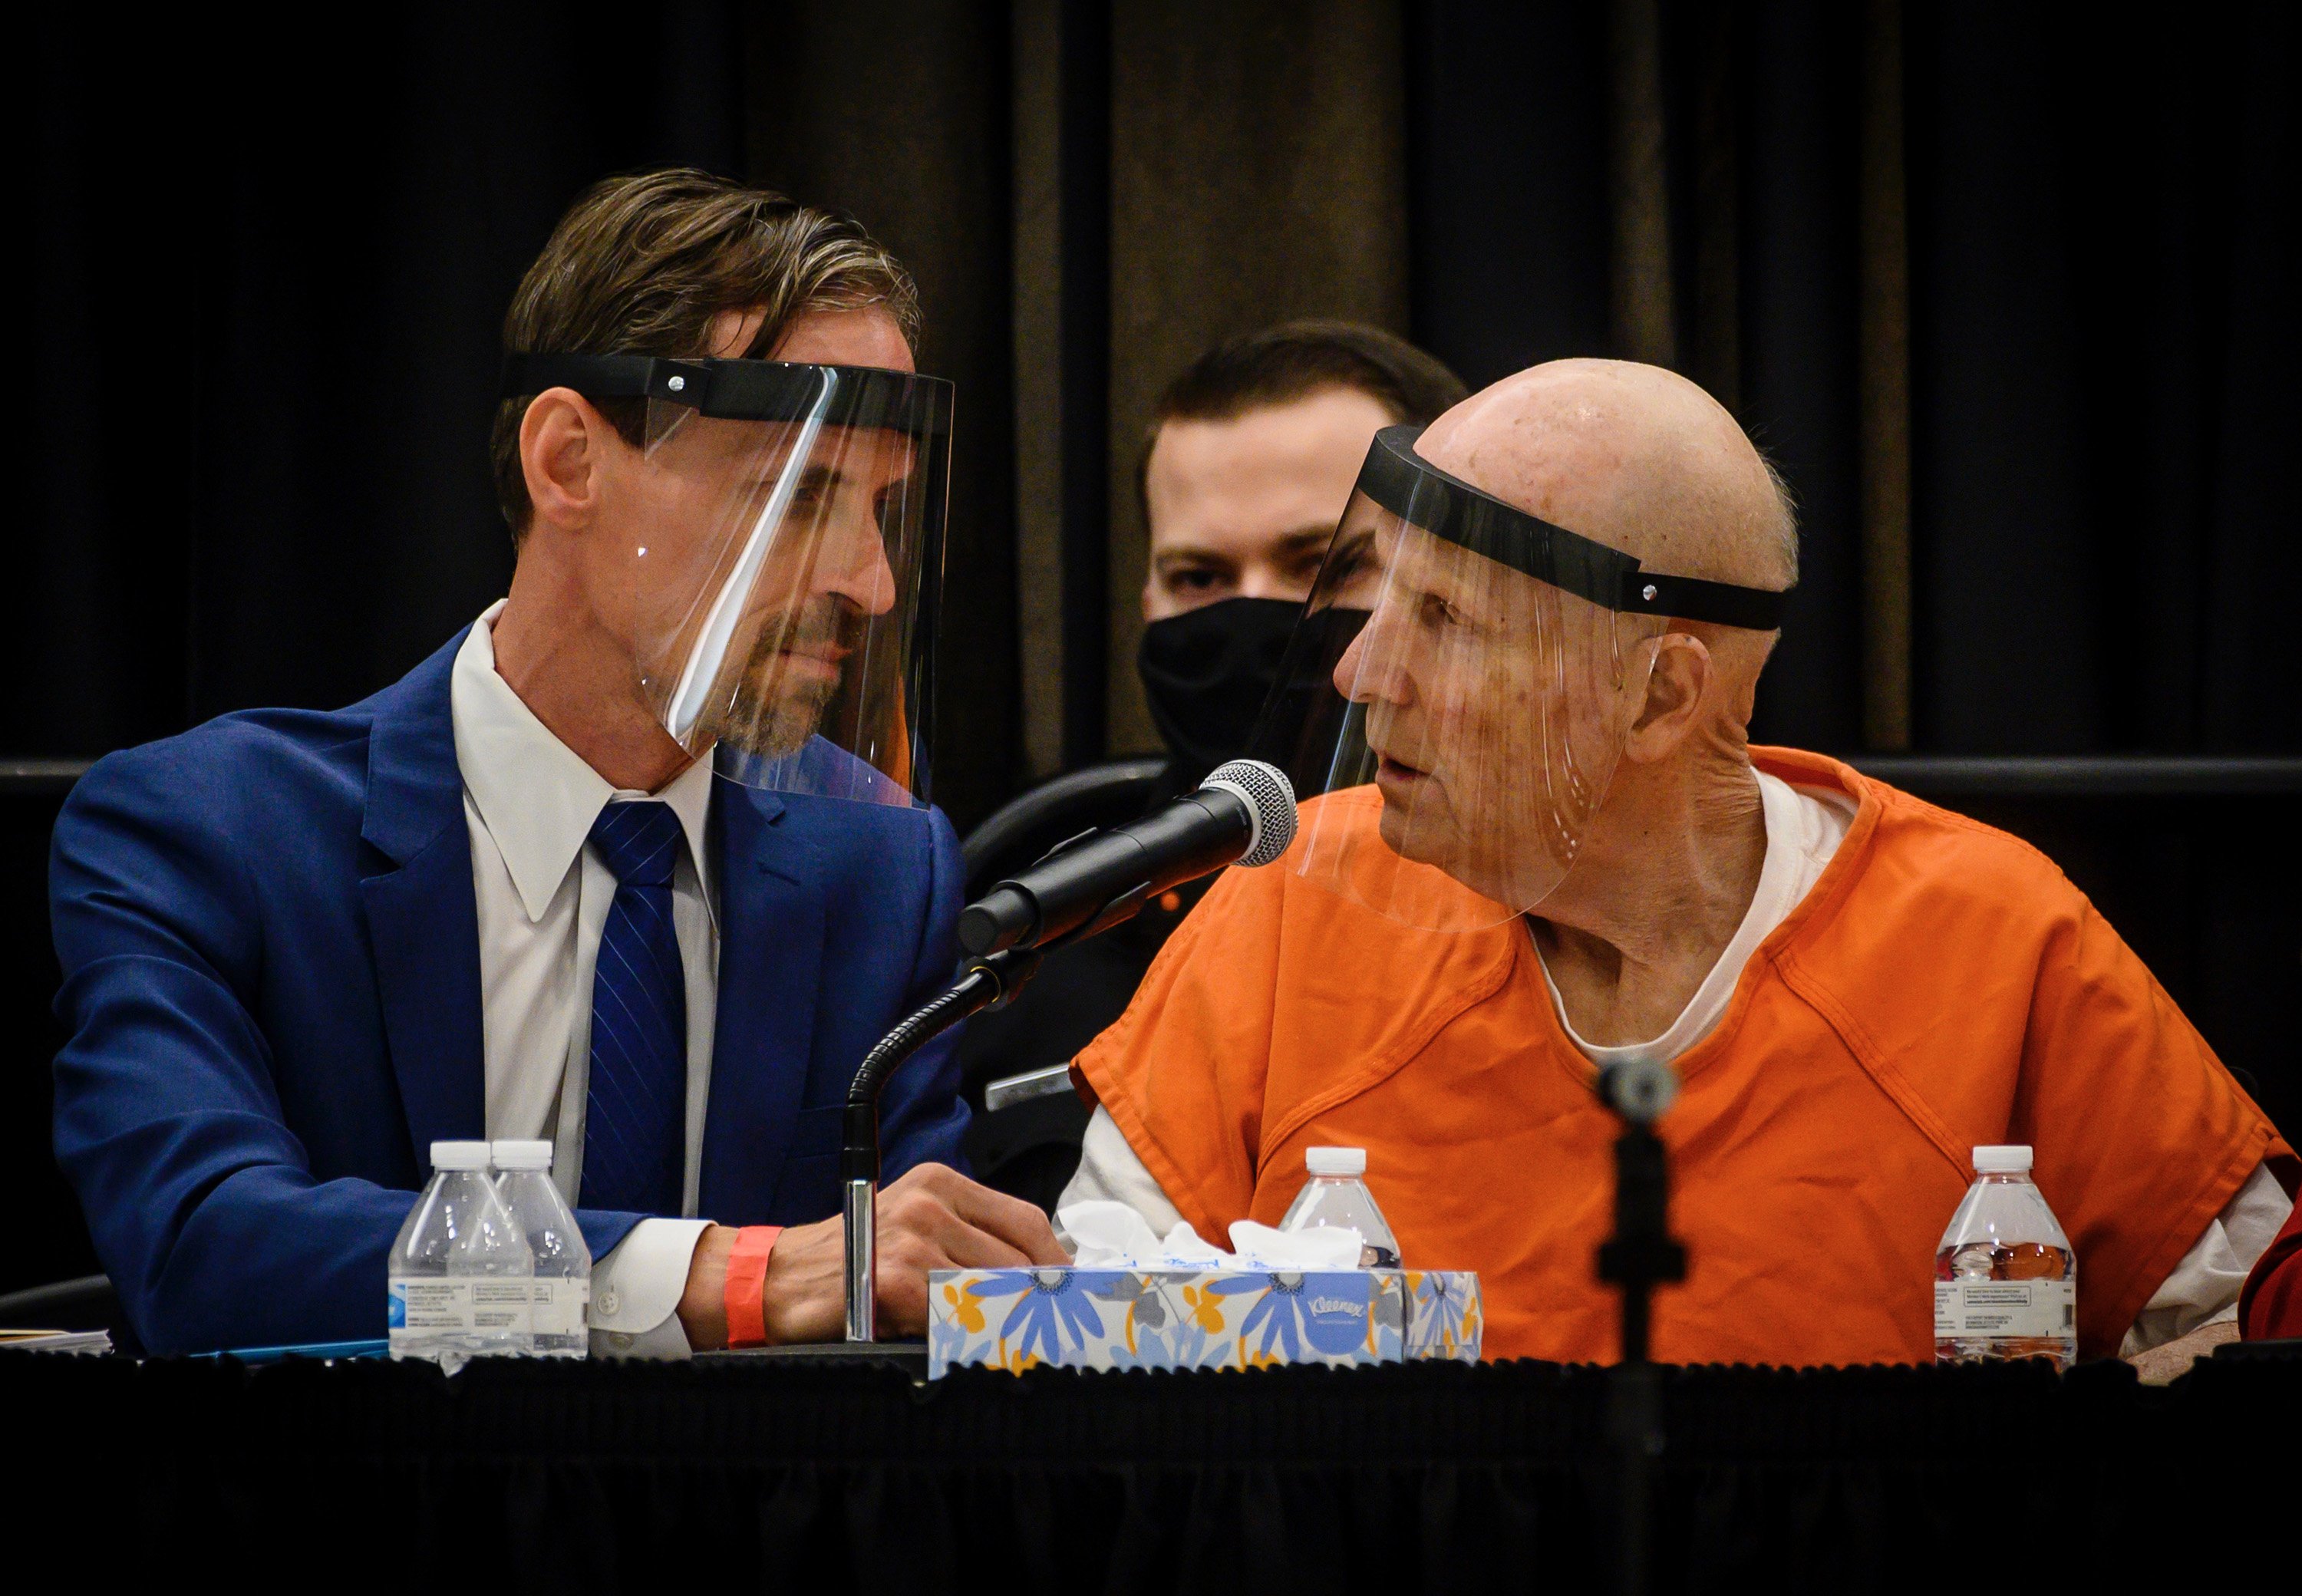 Public defender Joseph Cress and Joseph James DeAngelo are pictured at Sacramento State on Monday, June 29, 2020. | Source: Getty Images